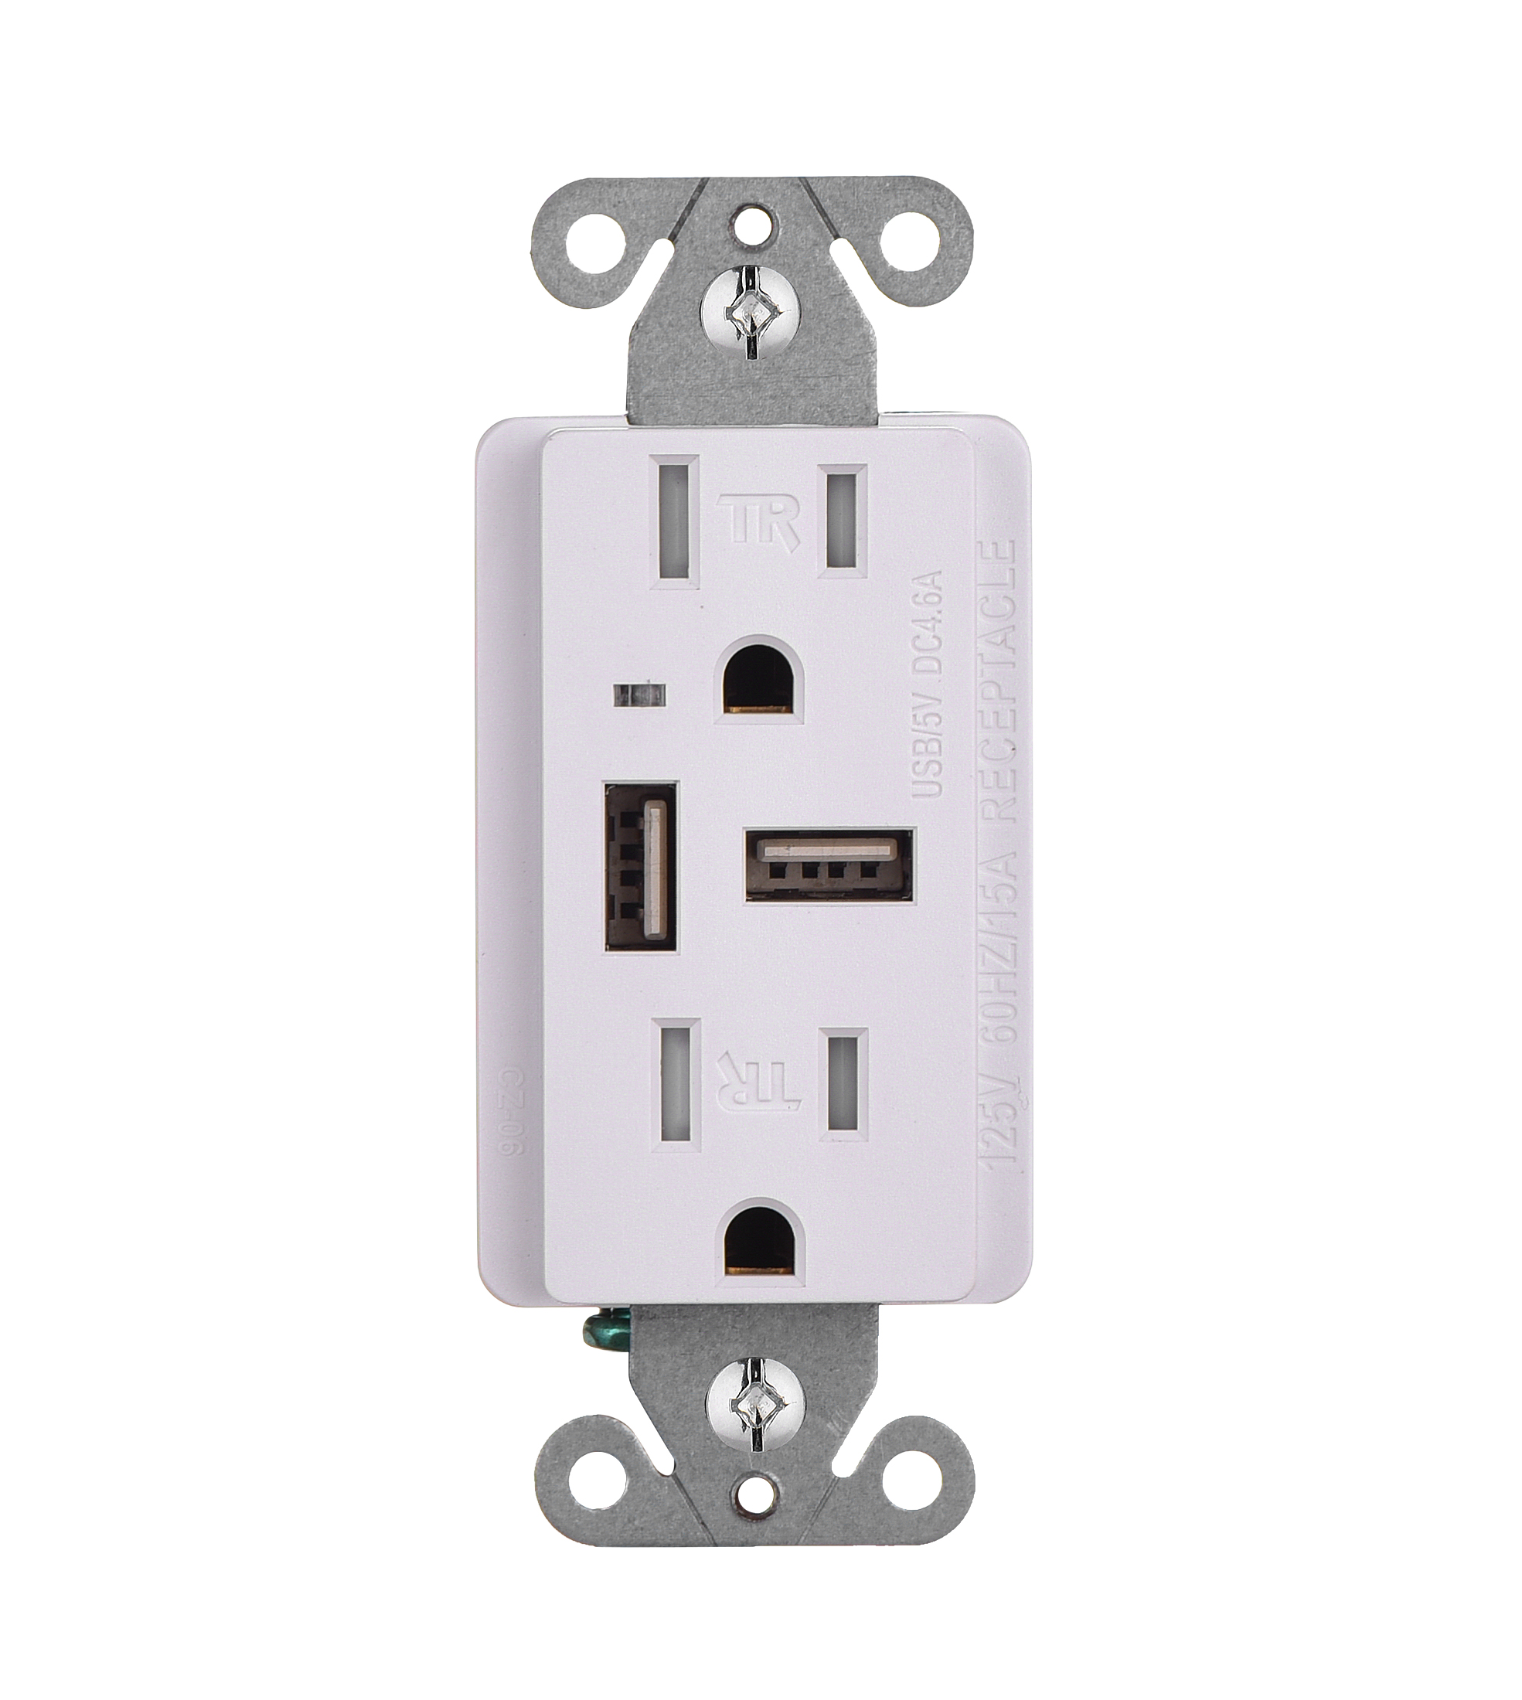 100% Original Electrical Outlets Installation - USB Wall Outlets CZ-06 – Faith Electric